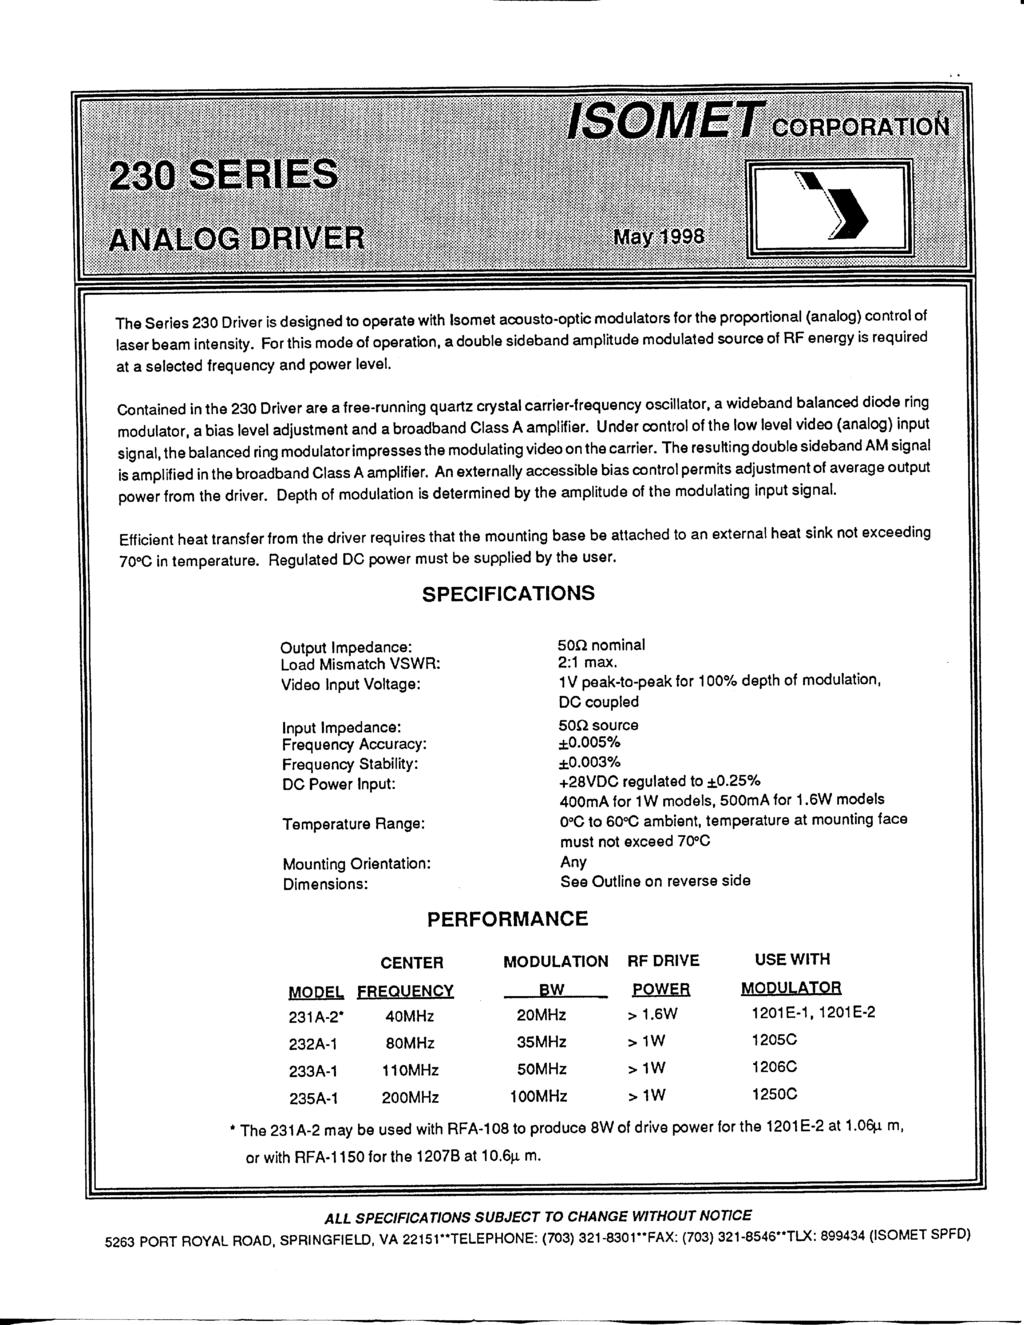 230 SERIES ISOMET ANALOG DRIVER May 1998 1 conpomiiok The Series 230 Driver is designed to operate with Isomet acousto-optic modulators for the proportional (analog) control of laser beam intensity.